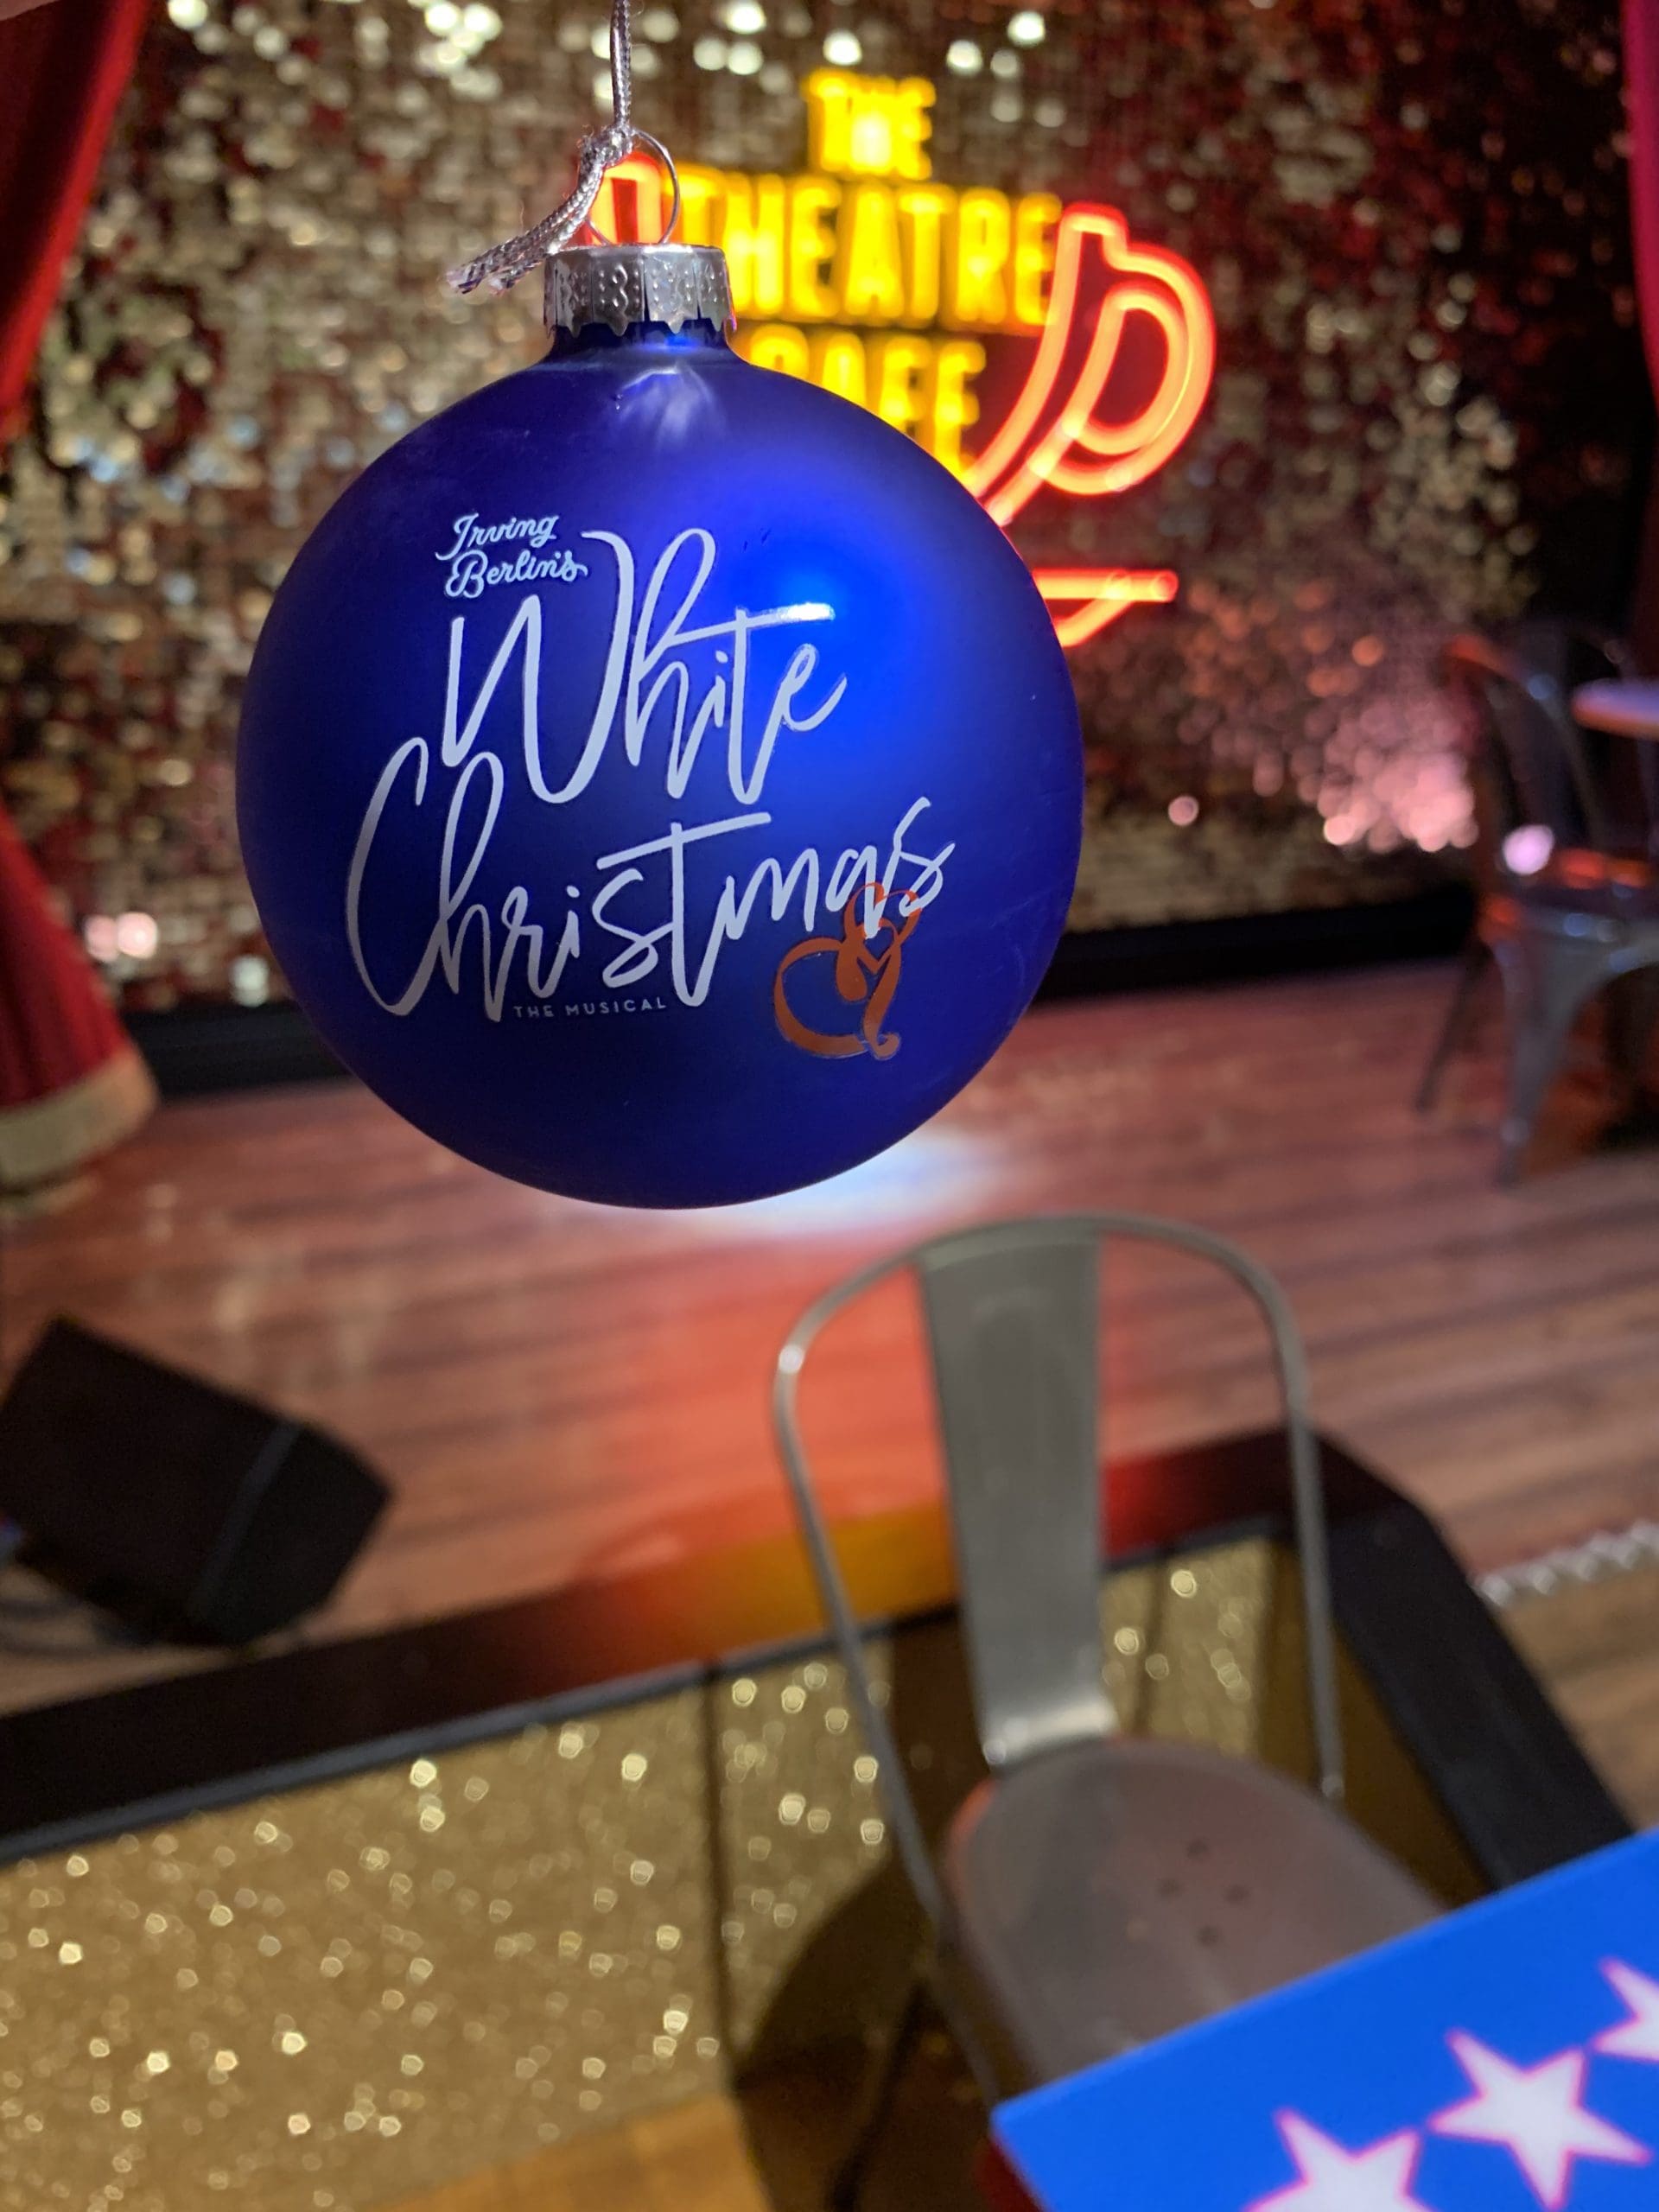 Enter our competition for a chance to win a White Christmas bauble